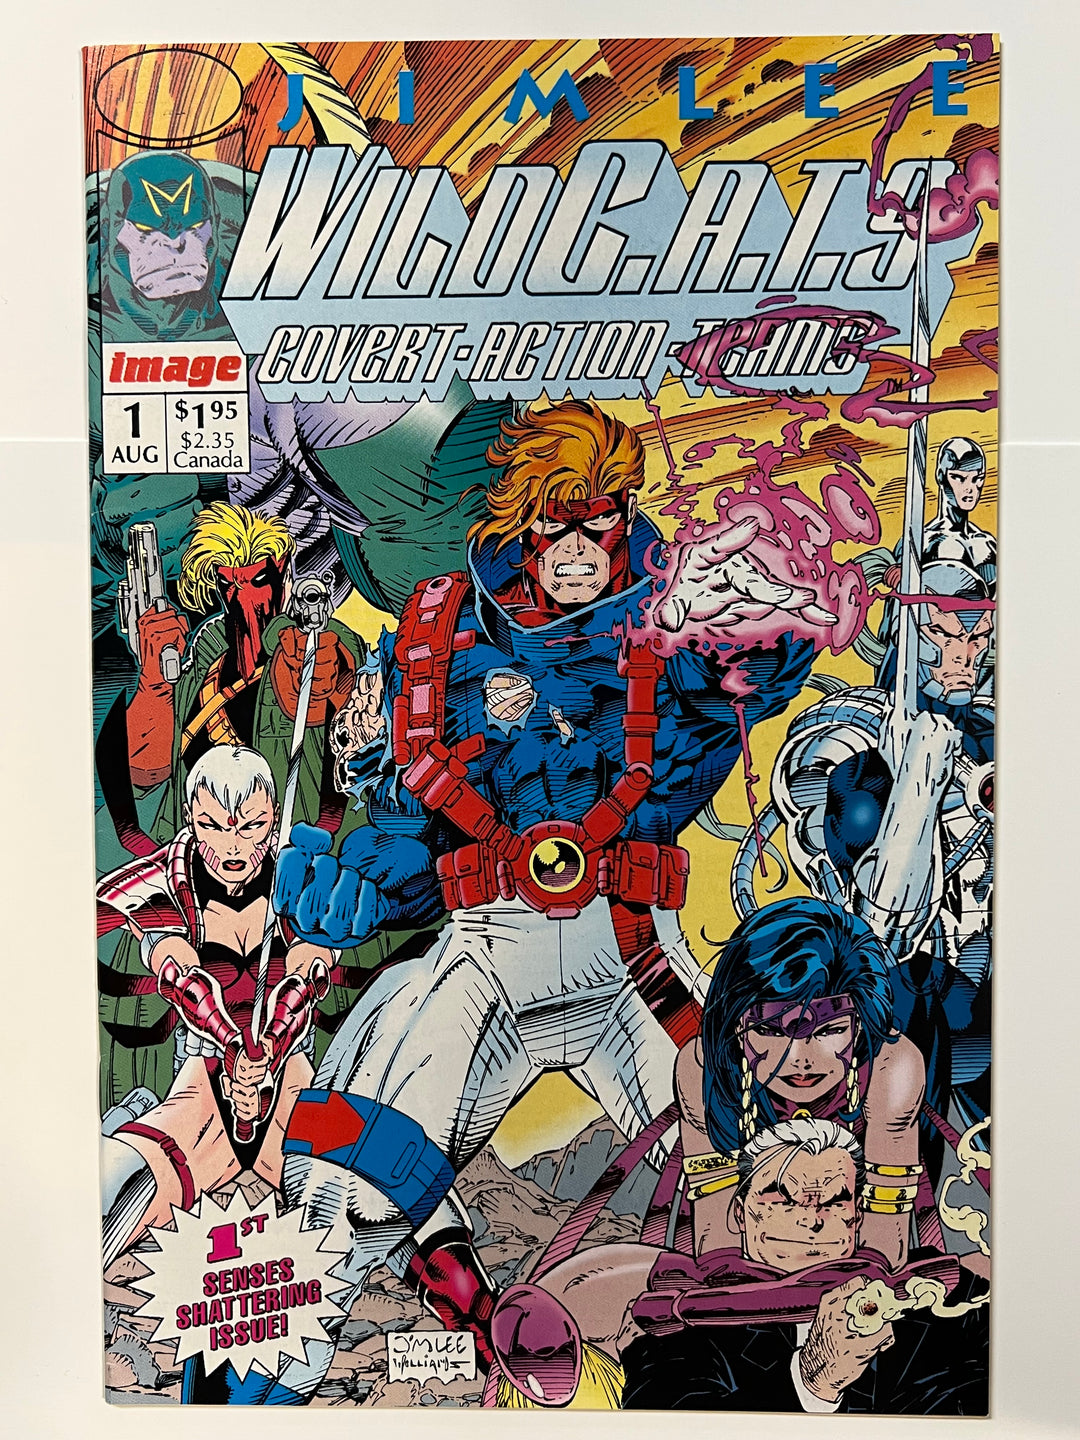 WildC.A.T.S.: Covert Action Teams #1 Image 1992 VF